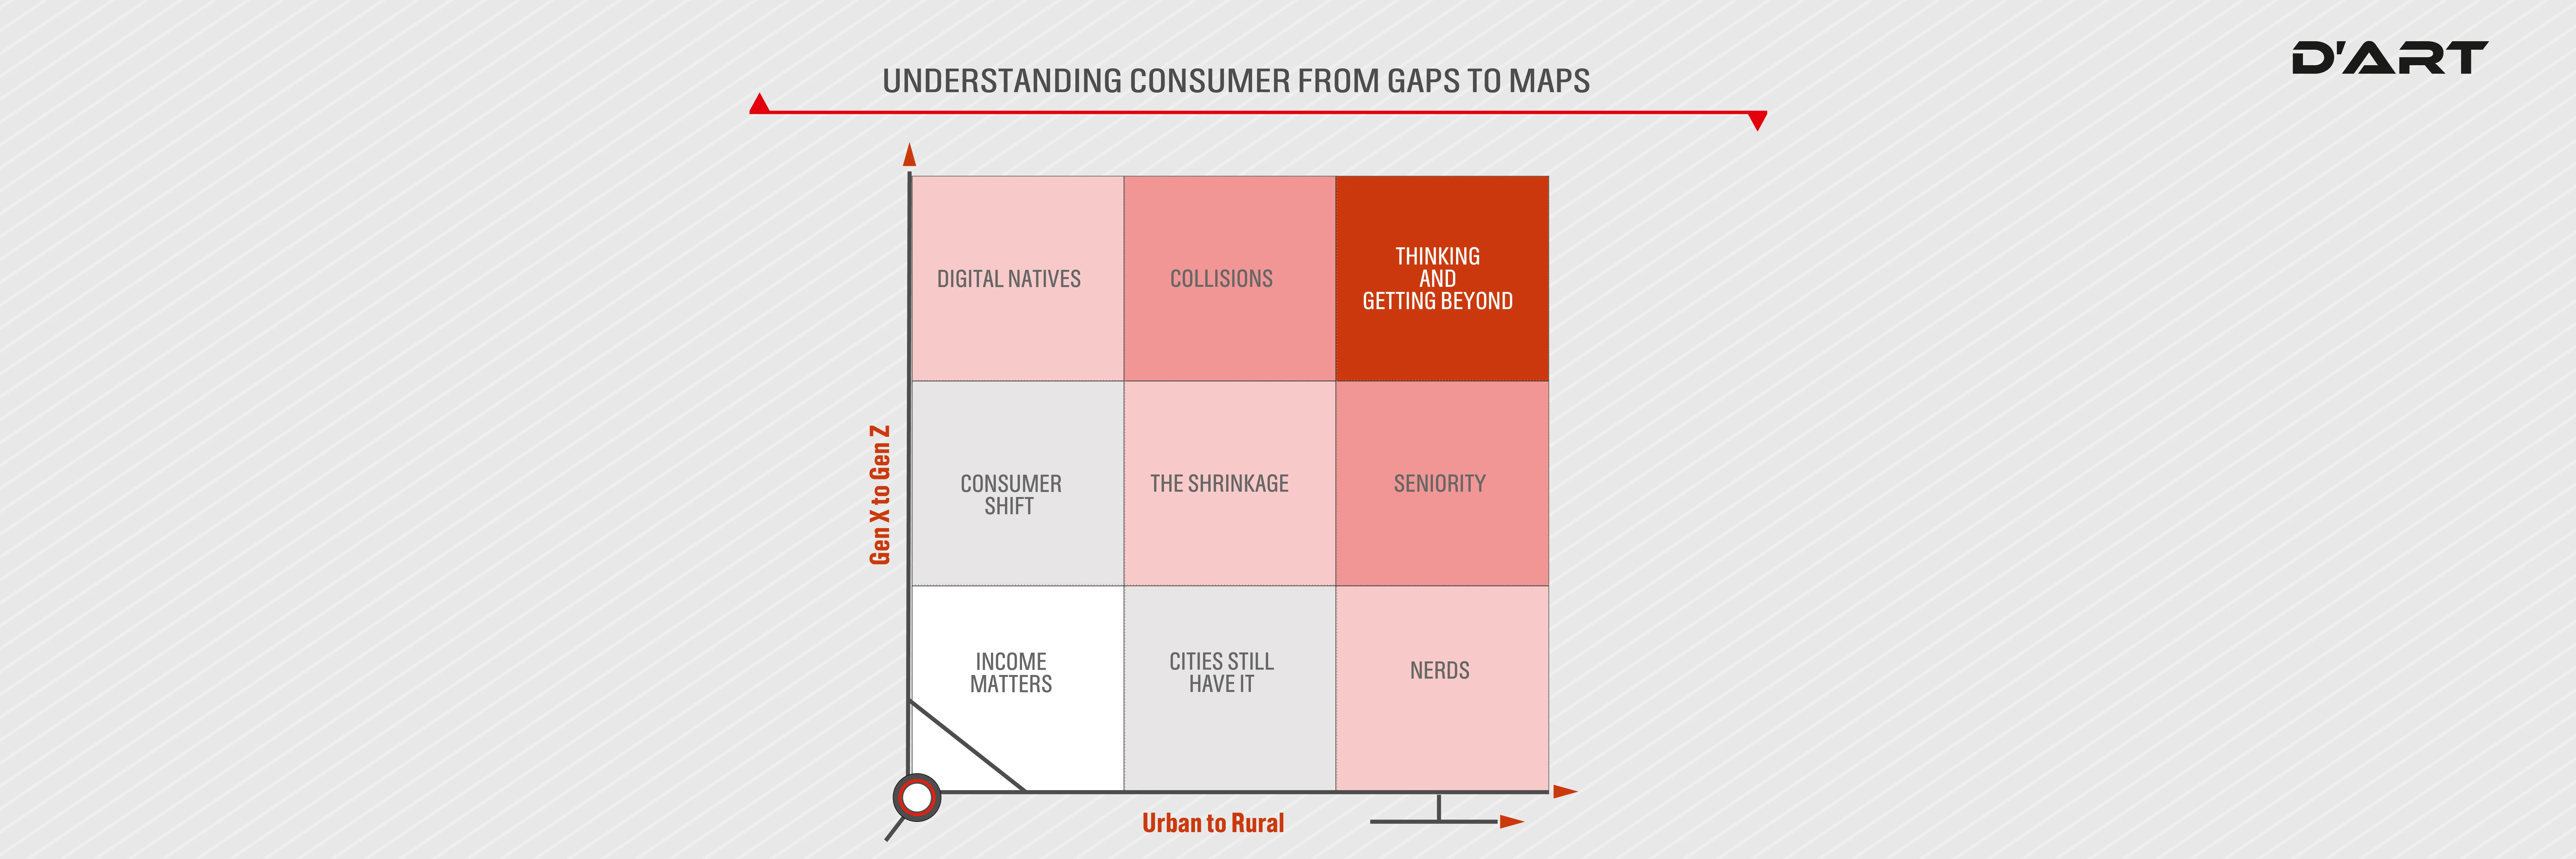 UNDERSTANDING CONSUMER FROM GAPS TO MAPS